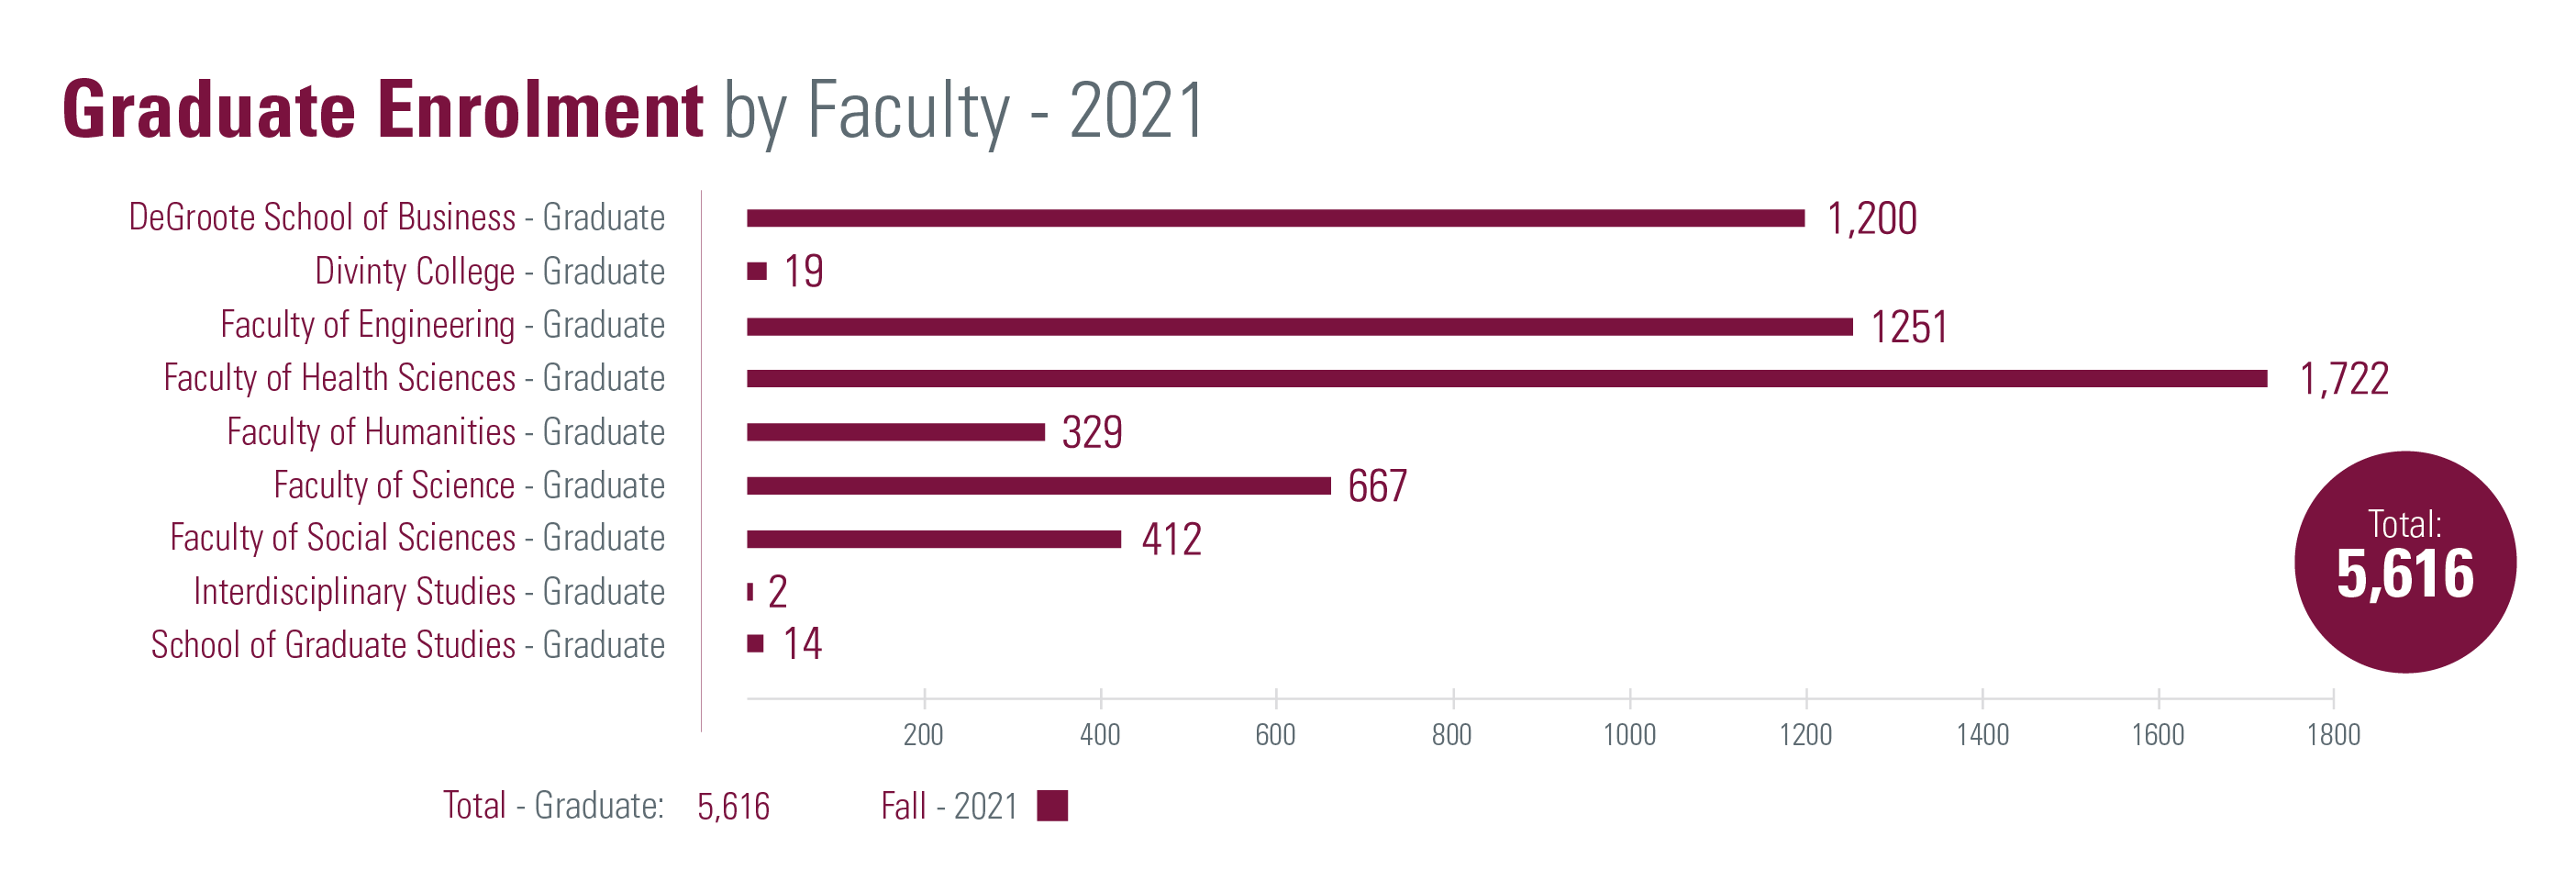 Graduate enrolment by Faculty for Fall 2021, totalling 5616. Faculty breakdowns with each term identified: DeGroote School of Business (1200); Divinity College (19); Faculty of Engineering (1251); Faculty of Health Sciences (1722); Faculty of Humanities (329); Faculty of Science (667); Faculty of Social Sciences (412 Fall); Interdisciplinary Studies (2); School of Graduate Studies (14)